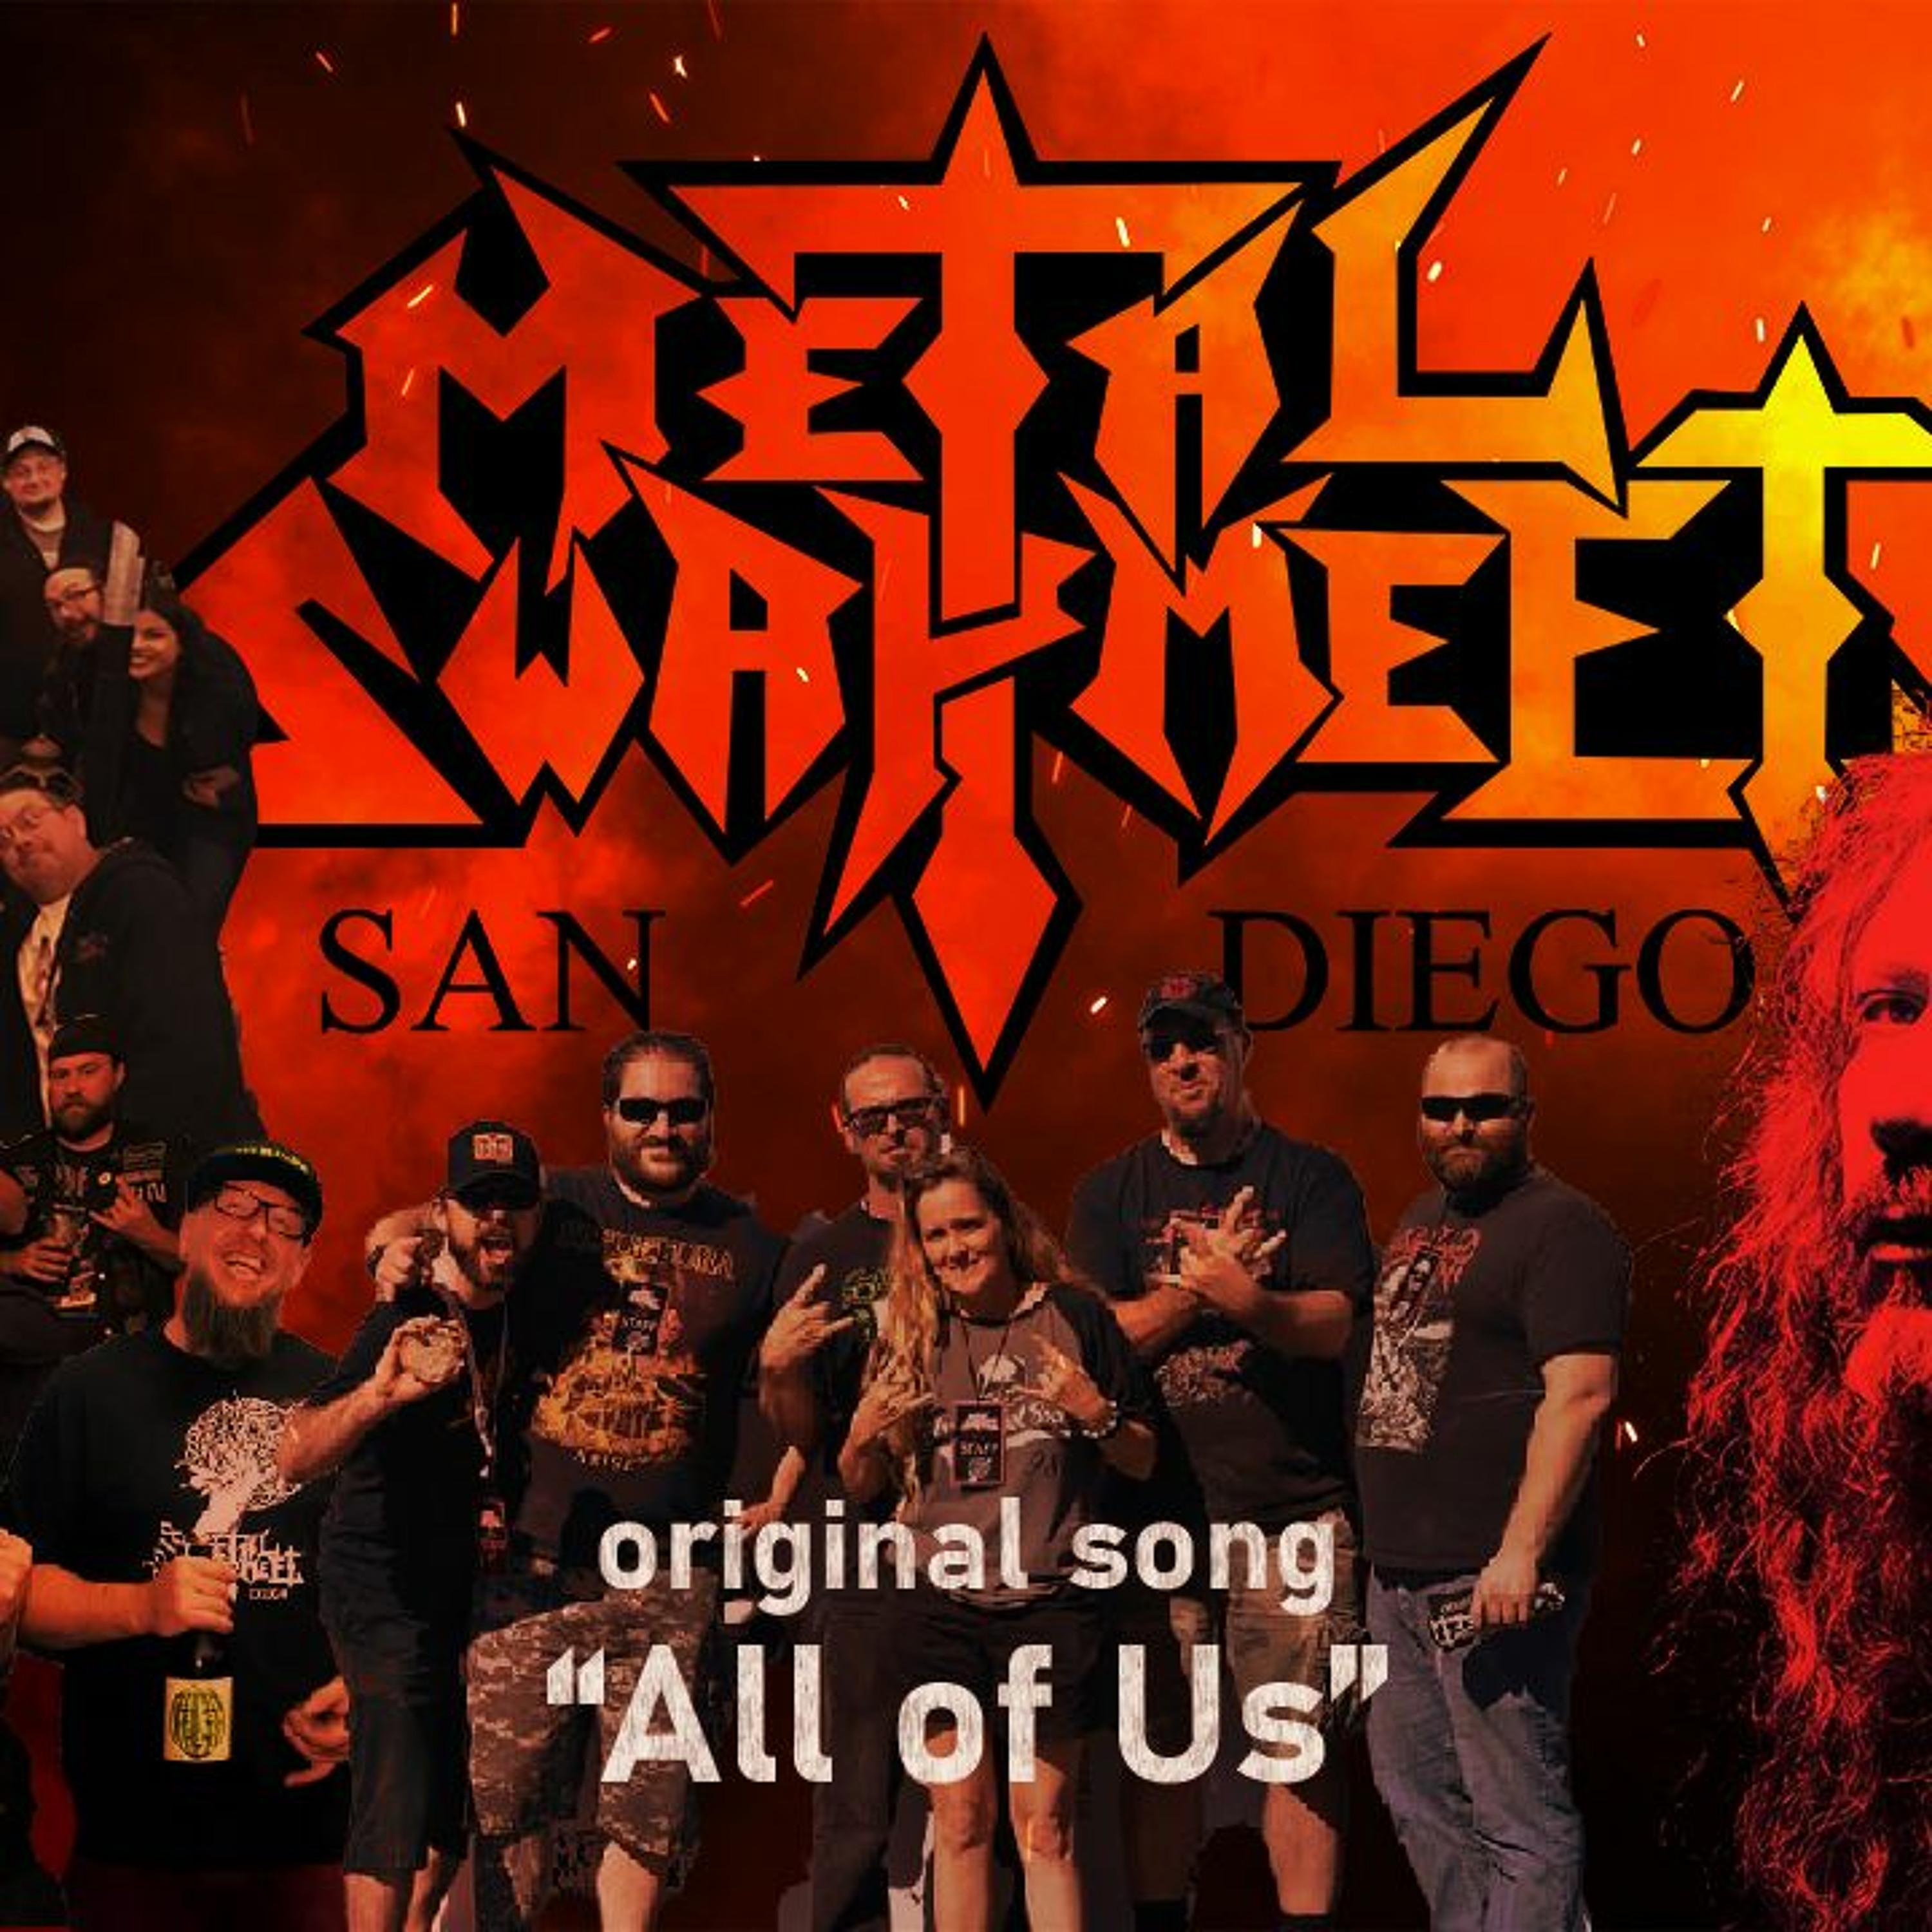 Metal Swap Meet song ”All of Us” by L.Imperator